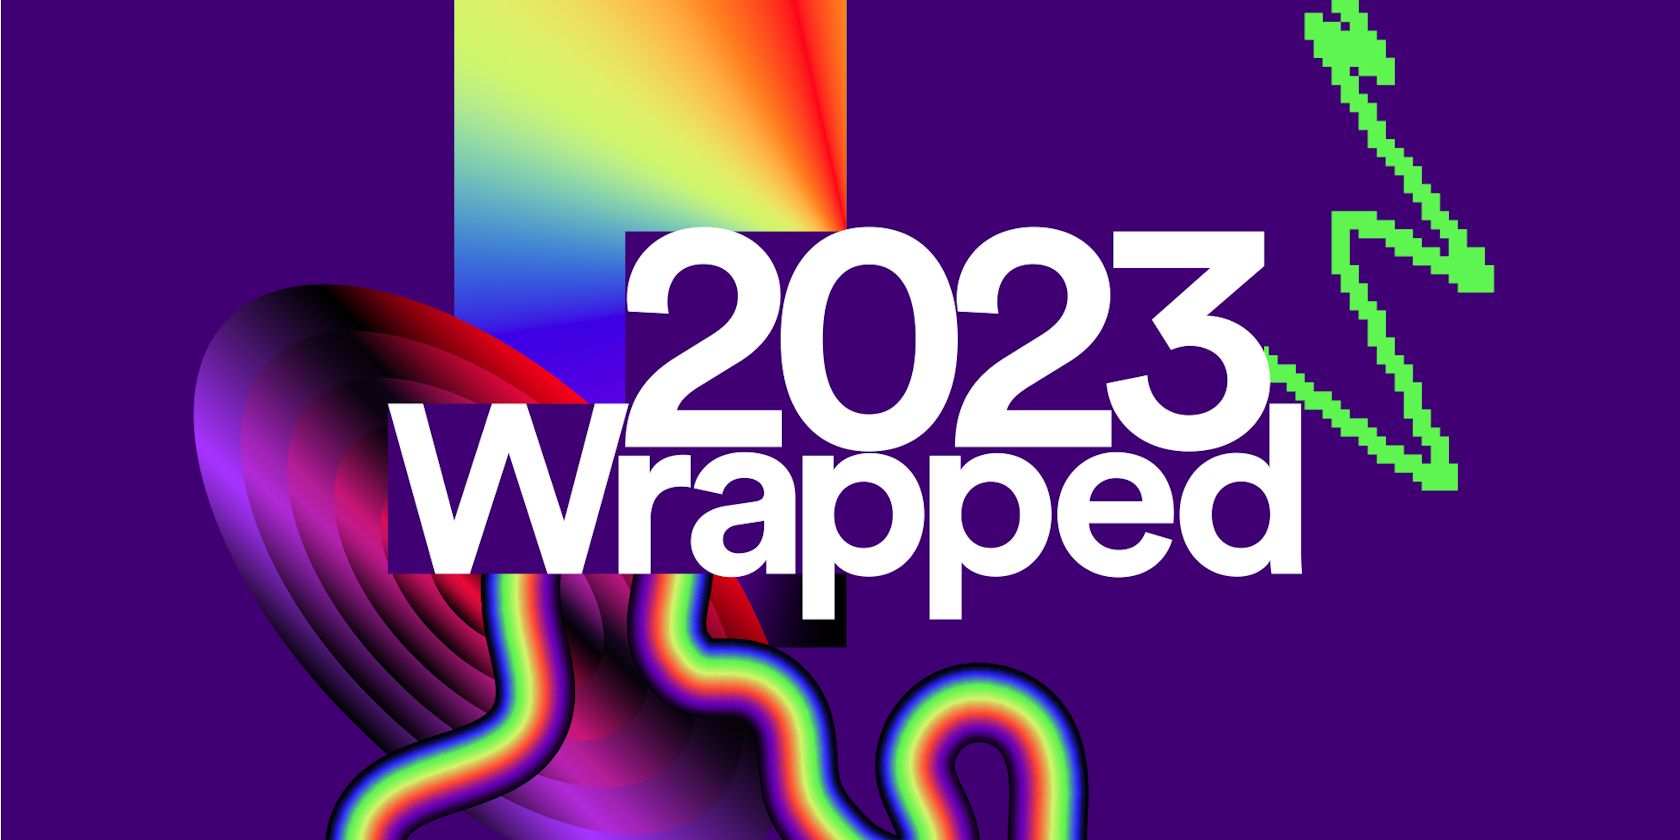 spotify wrapped 2023 official logo style on purple background